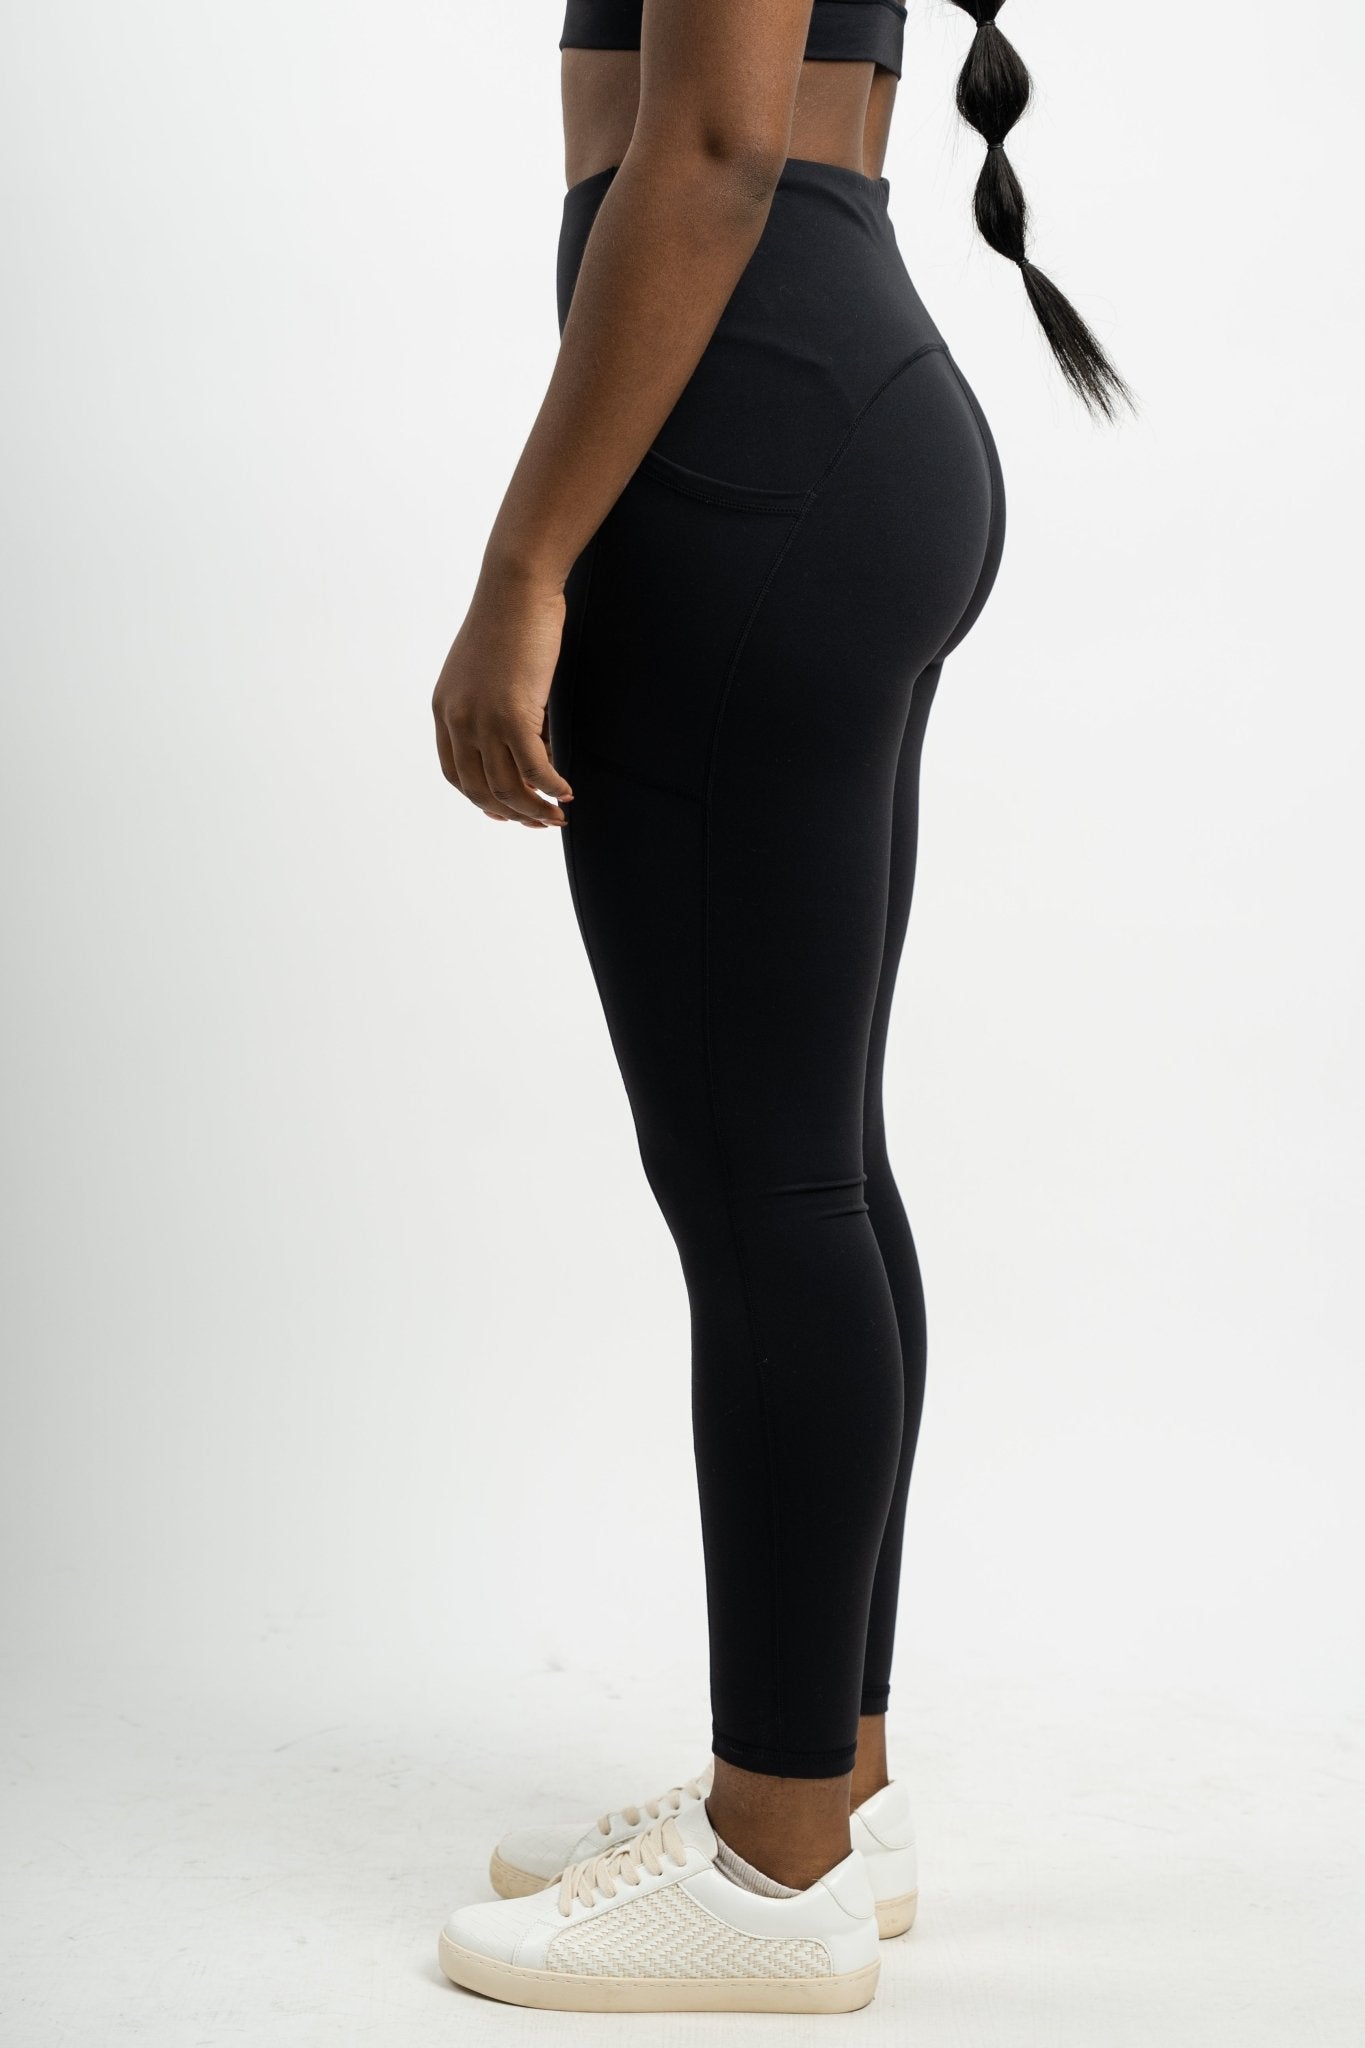 Shop Affordable, Cute, High Quality Leggings and Tights for Women